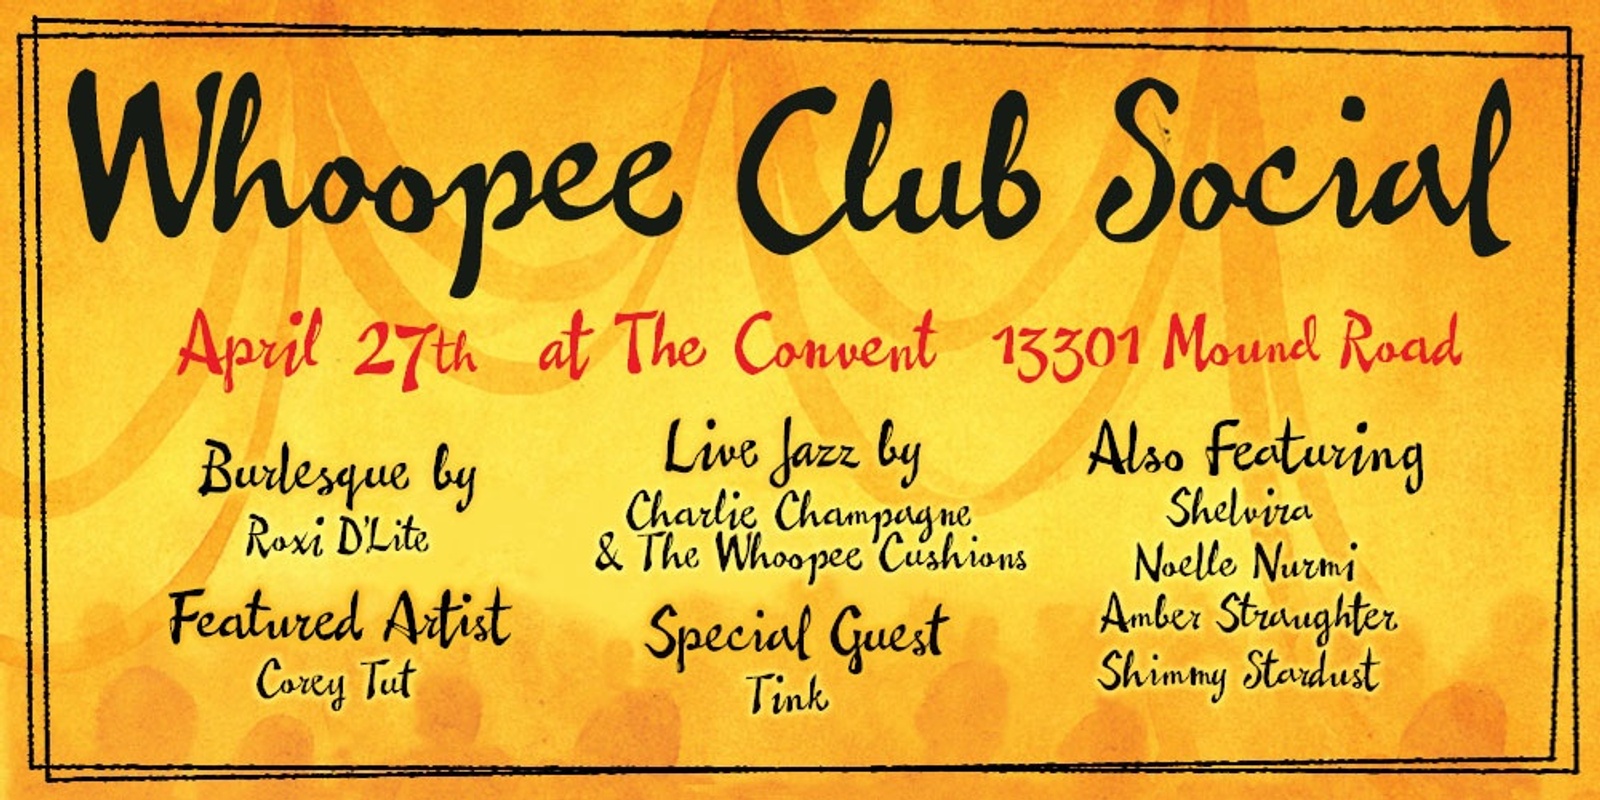 Banner image for The Whoopee Club Social